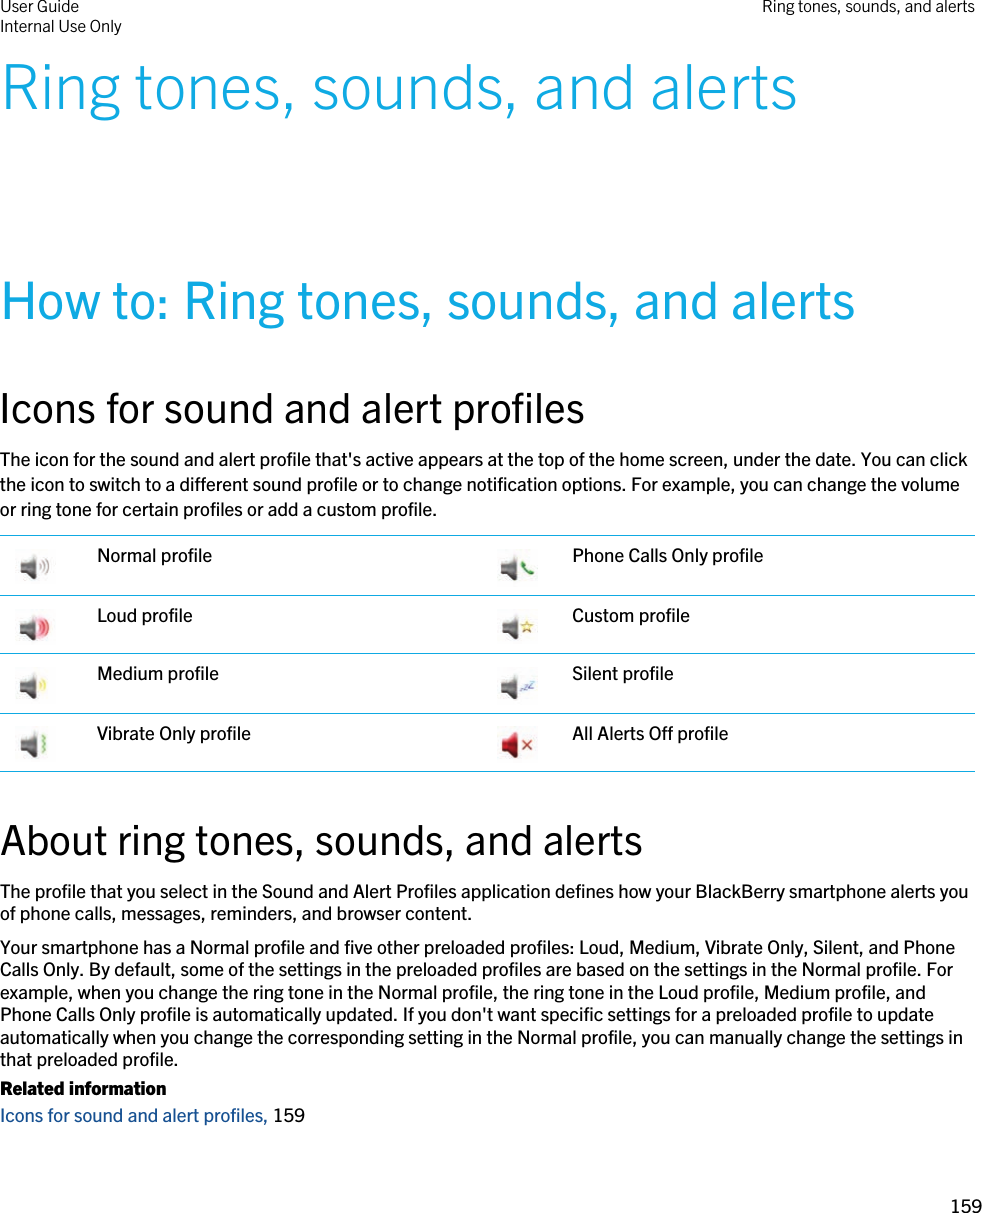 Ring tones, sounds, and alertsHow to: Ring tones, sounds, and alertsIcons for sound and alert profilesThe icon for the sound and alert profile that&apos;s active appears at the top of the home screen, under the date. You can click the icon to switch to a different sound profile or to change notification options. For example, you can change the volume or ring tone for certain profiles or add a custom profile. Normal profile  Phone Calls Only profile Loud profile  Custom profile Medium profile  Silent profile Vibrate Only profile  All Alerts Off profileAbout ring tones, sounds, and alertsThe profile that you select in the Sound and Alert Profiles application defines how your BlackBerry smartphone alerts you of phone calls, messages, reminders, and browser content.Your smartphone has a Normal profile and five other preloaded profiles: Loud, Medium, Vibrate Only, Silent, and Phone Calls Only. By default, some of the settings in the preloaded profiles are based on the settings in the Normal profile. For example, when you change the ring tone in the Normal profile, the ring tone in the Loud profile, Medium profile, and Phone Calls Only profile is automatically updated. If you don&apos;t want specific settings for a preloaded profile to update automatically when you change the corresponding setting in the Normal profile, you can manually change the settings in that preloaded profile.Related informationIcons for sound and alert profiles, 159 User GuideInternal Use Only Ring tones, sounds, and alerts159 